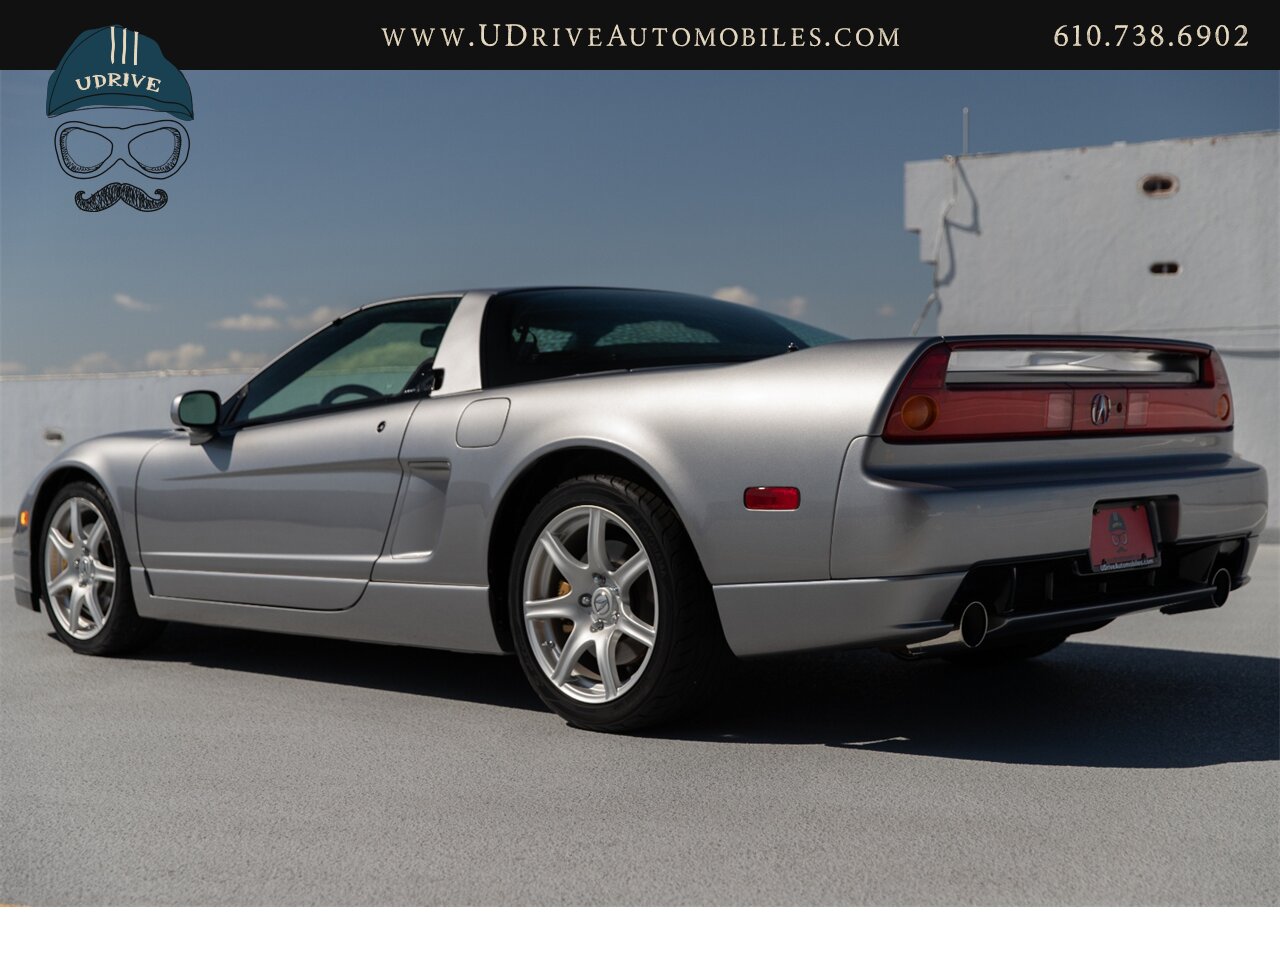 2002 Acura NSX NSX-T 9k Miles 6 Speed Manual Service History  Collector Grade - Photo 23 - West Chester, PA 19382